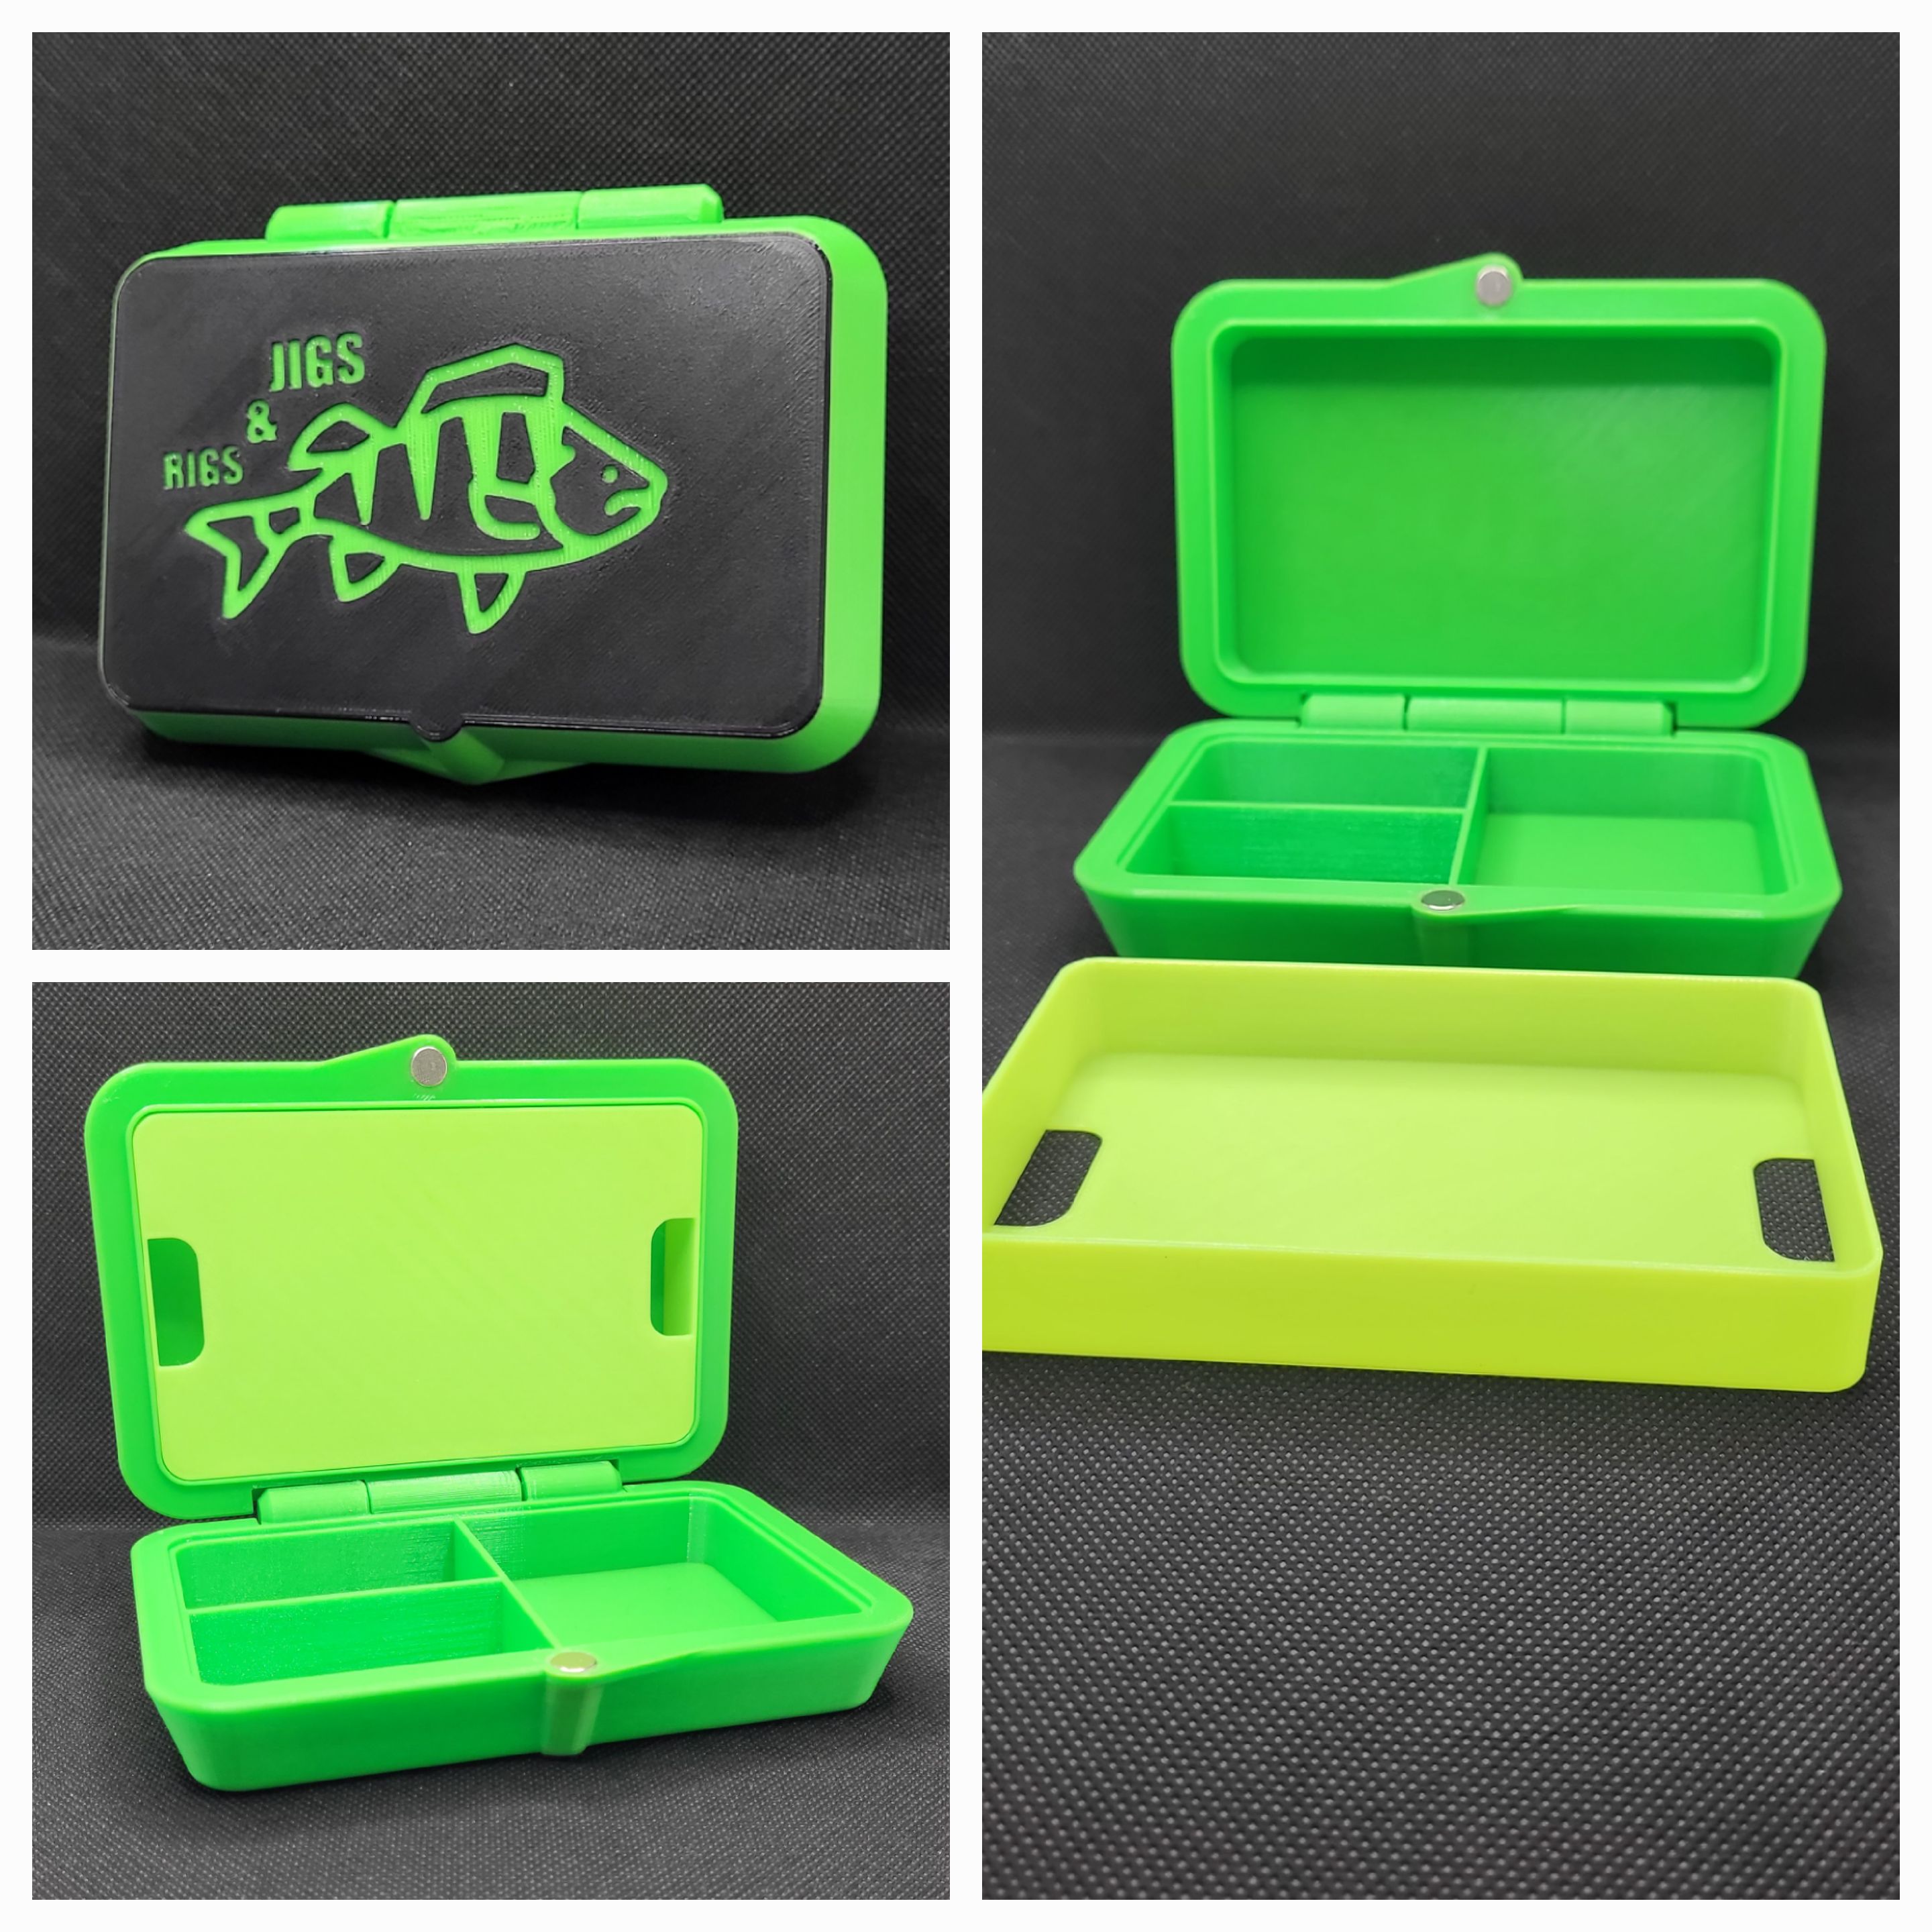 MAGNETIC JIG & RIG BOX FOR FISHING by 3D_Keller